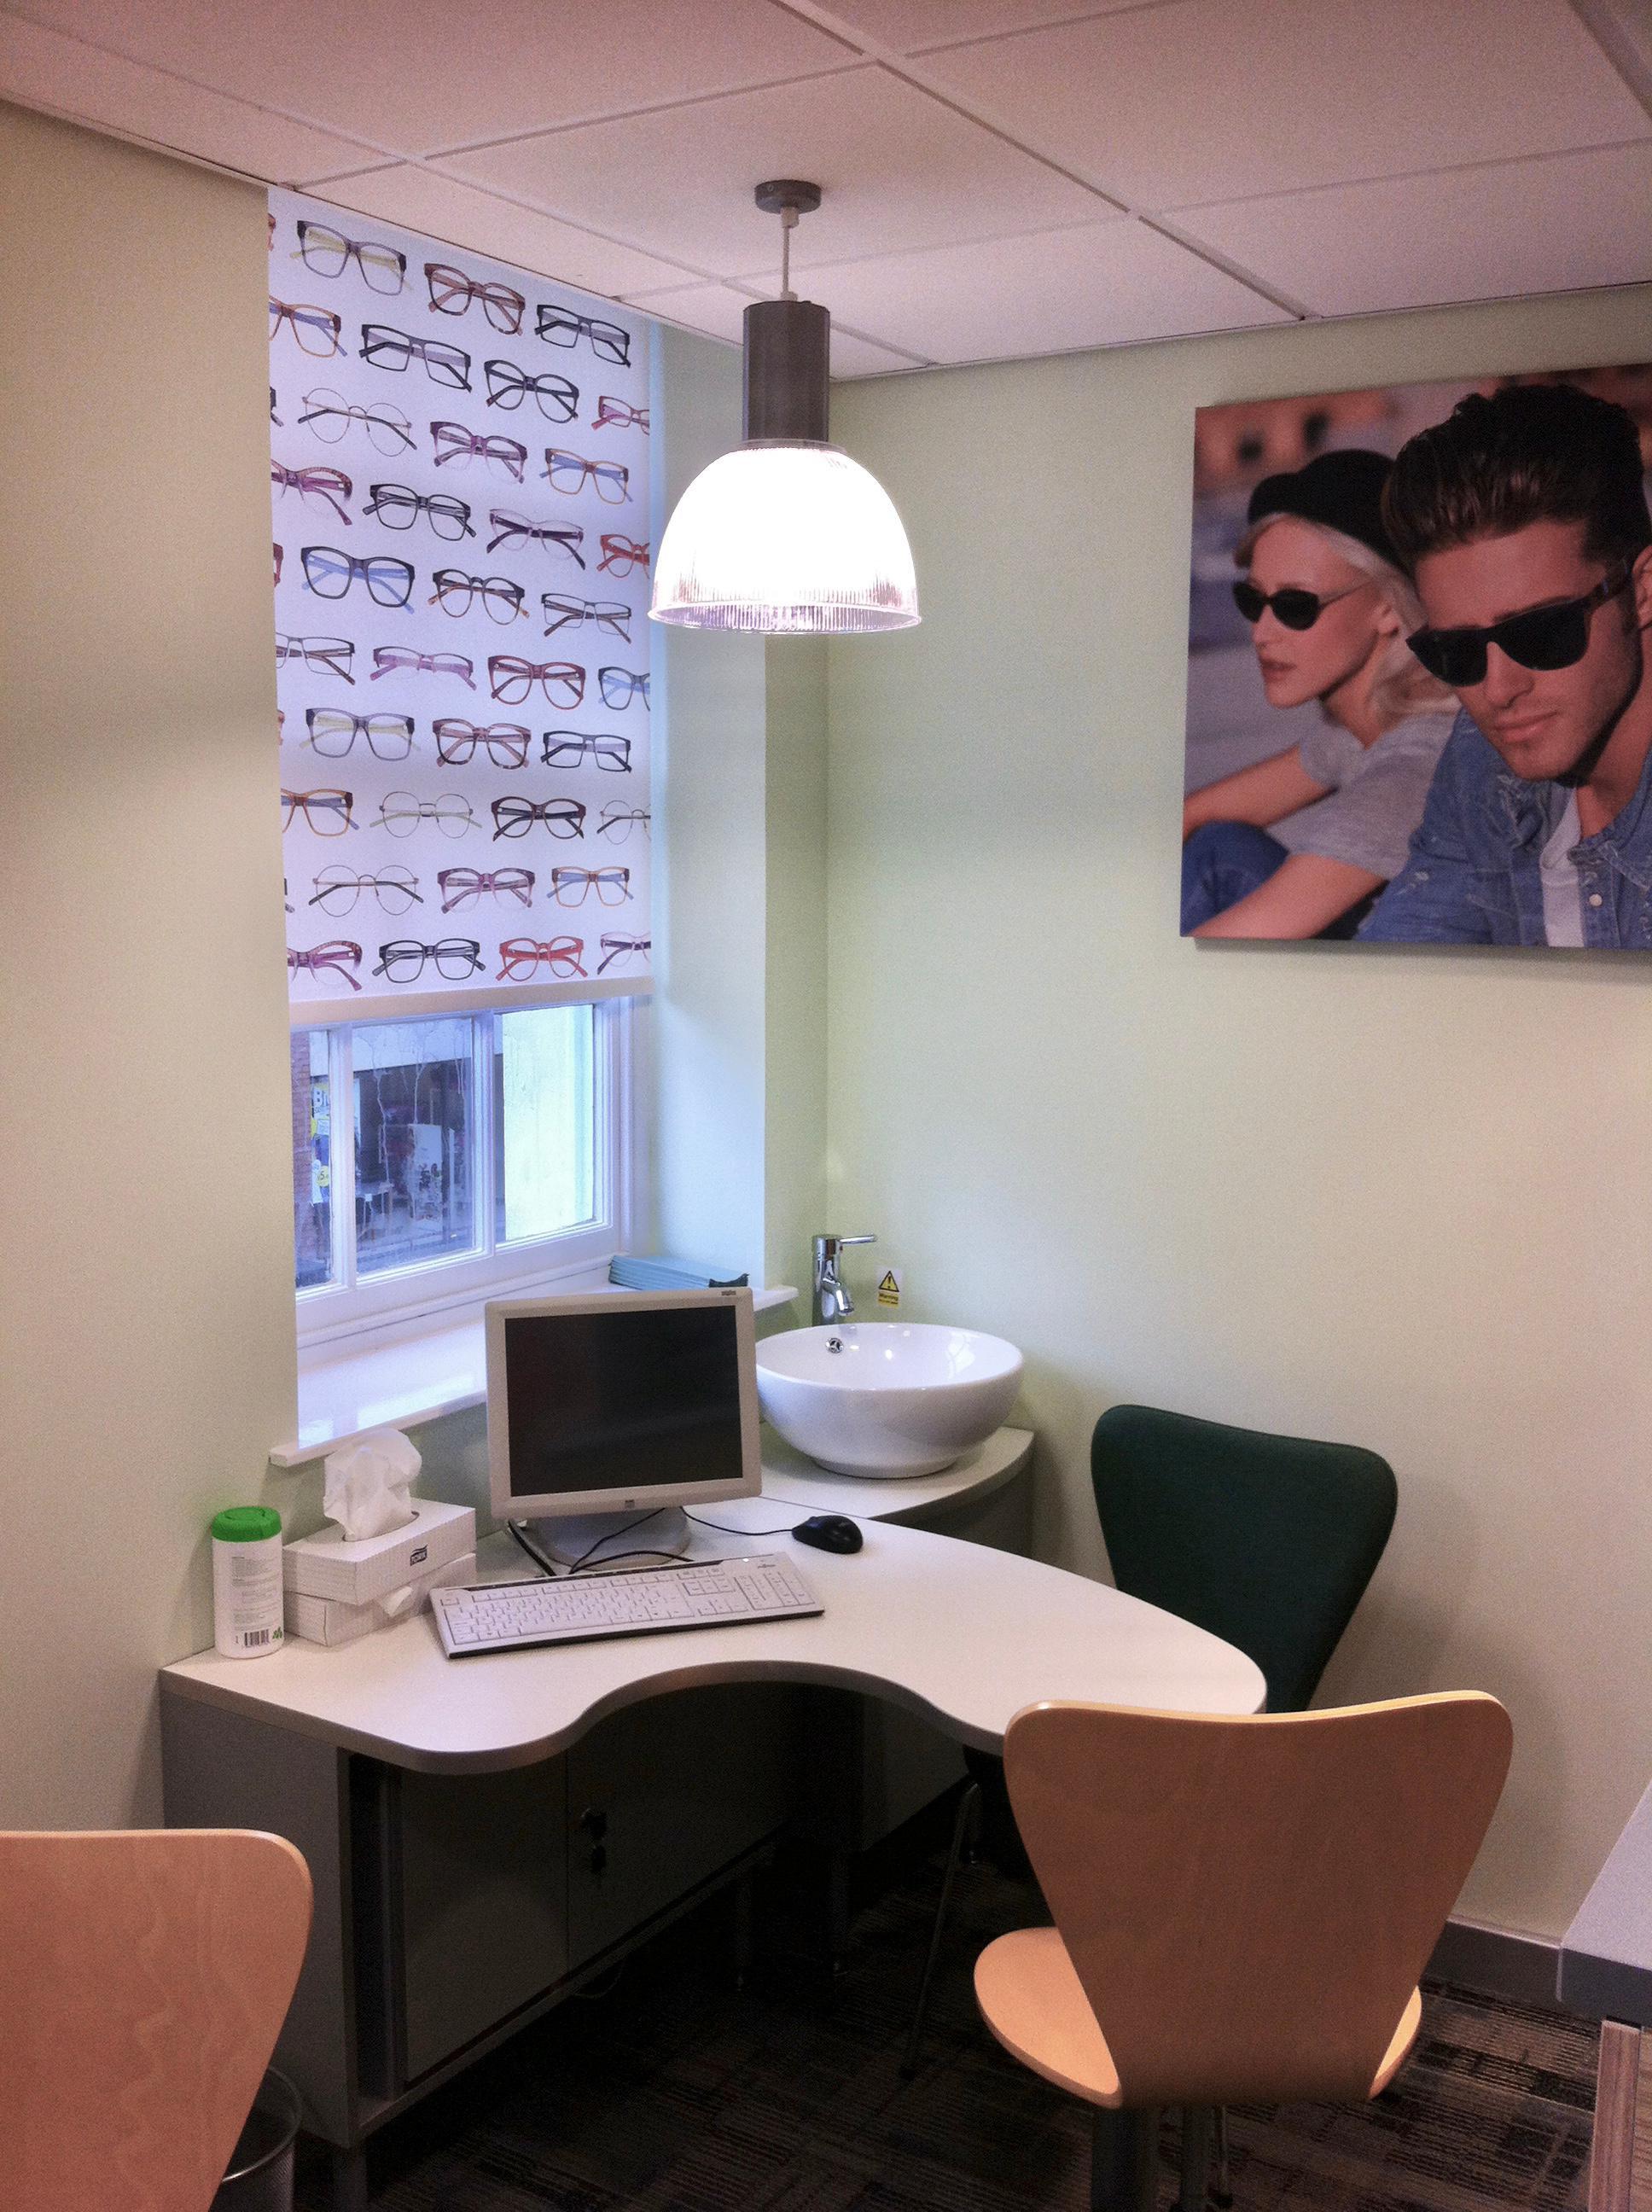 Images Specsavers Opticians and Audiologists - Taunton